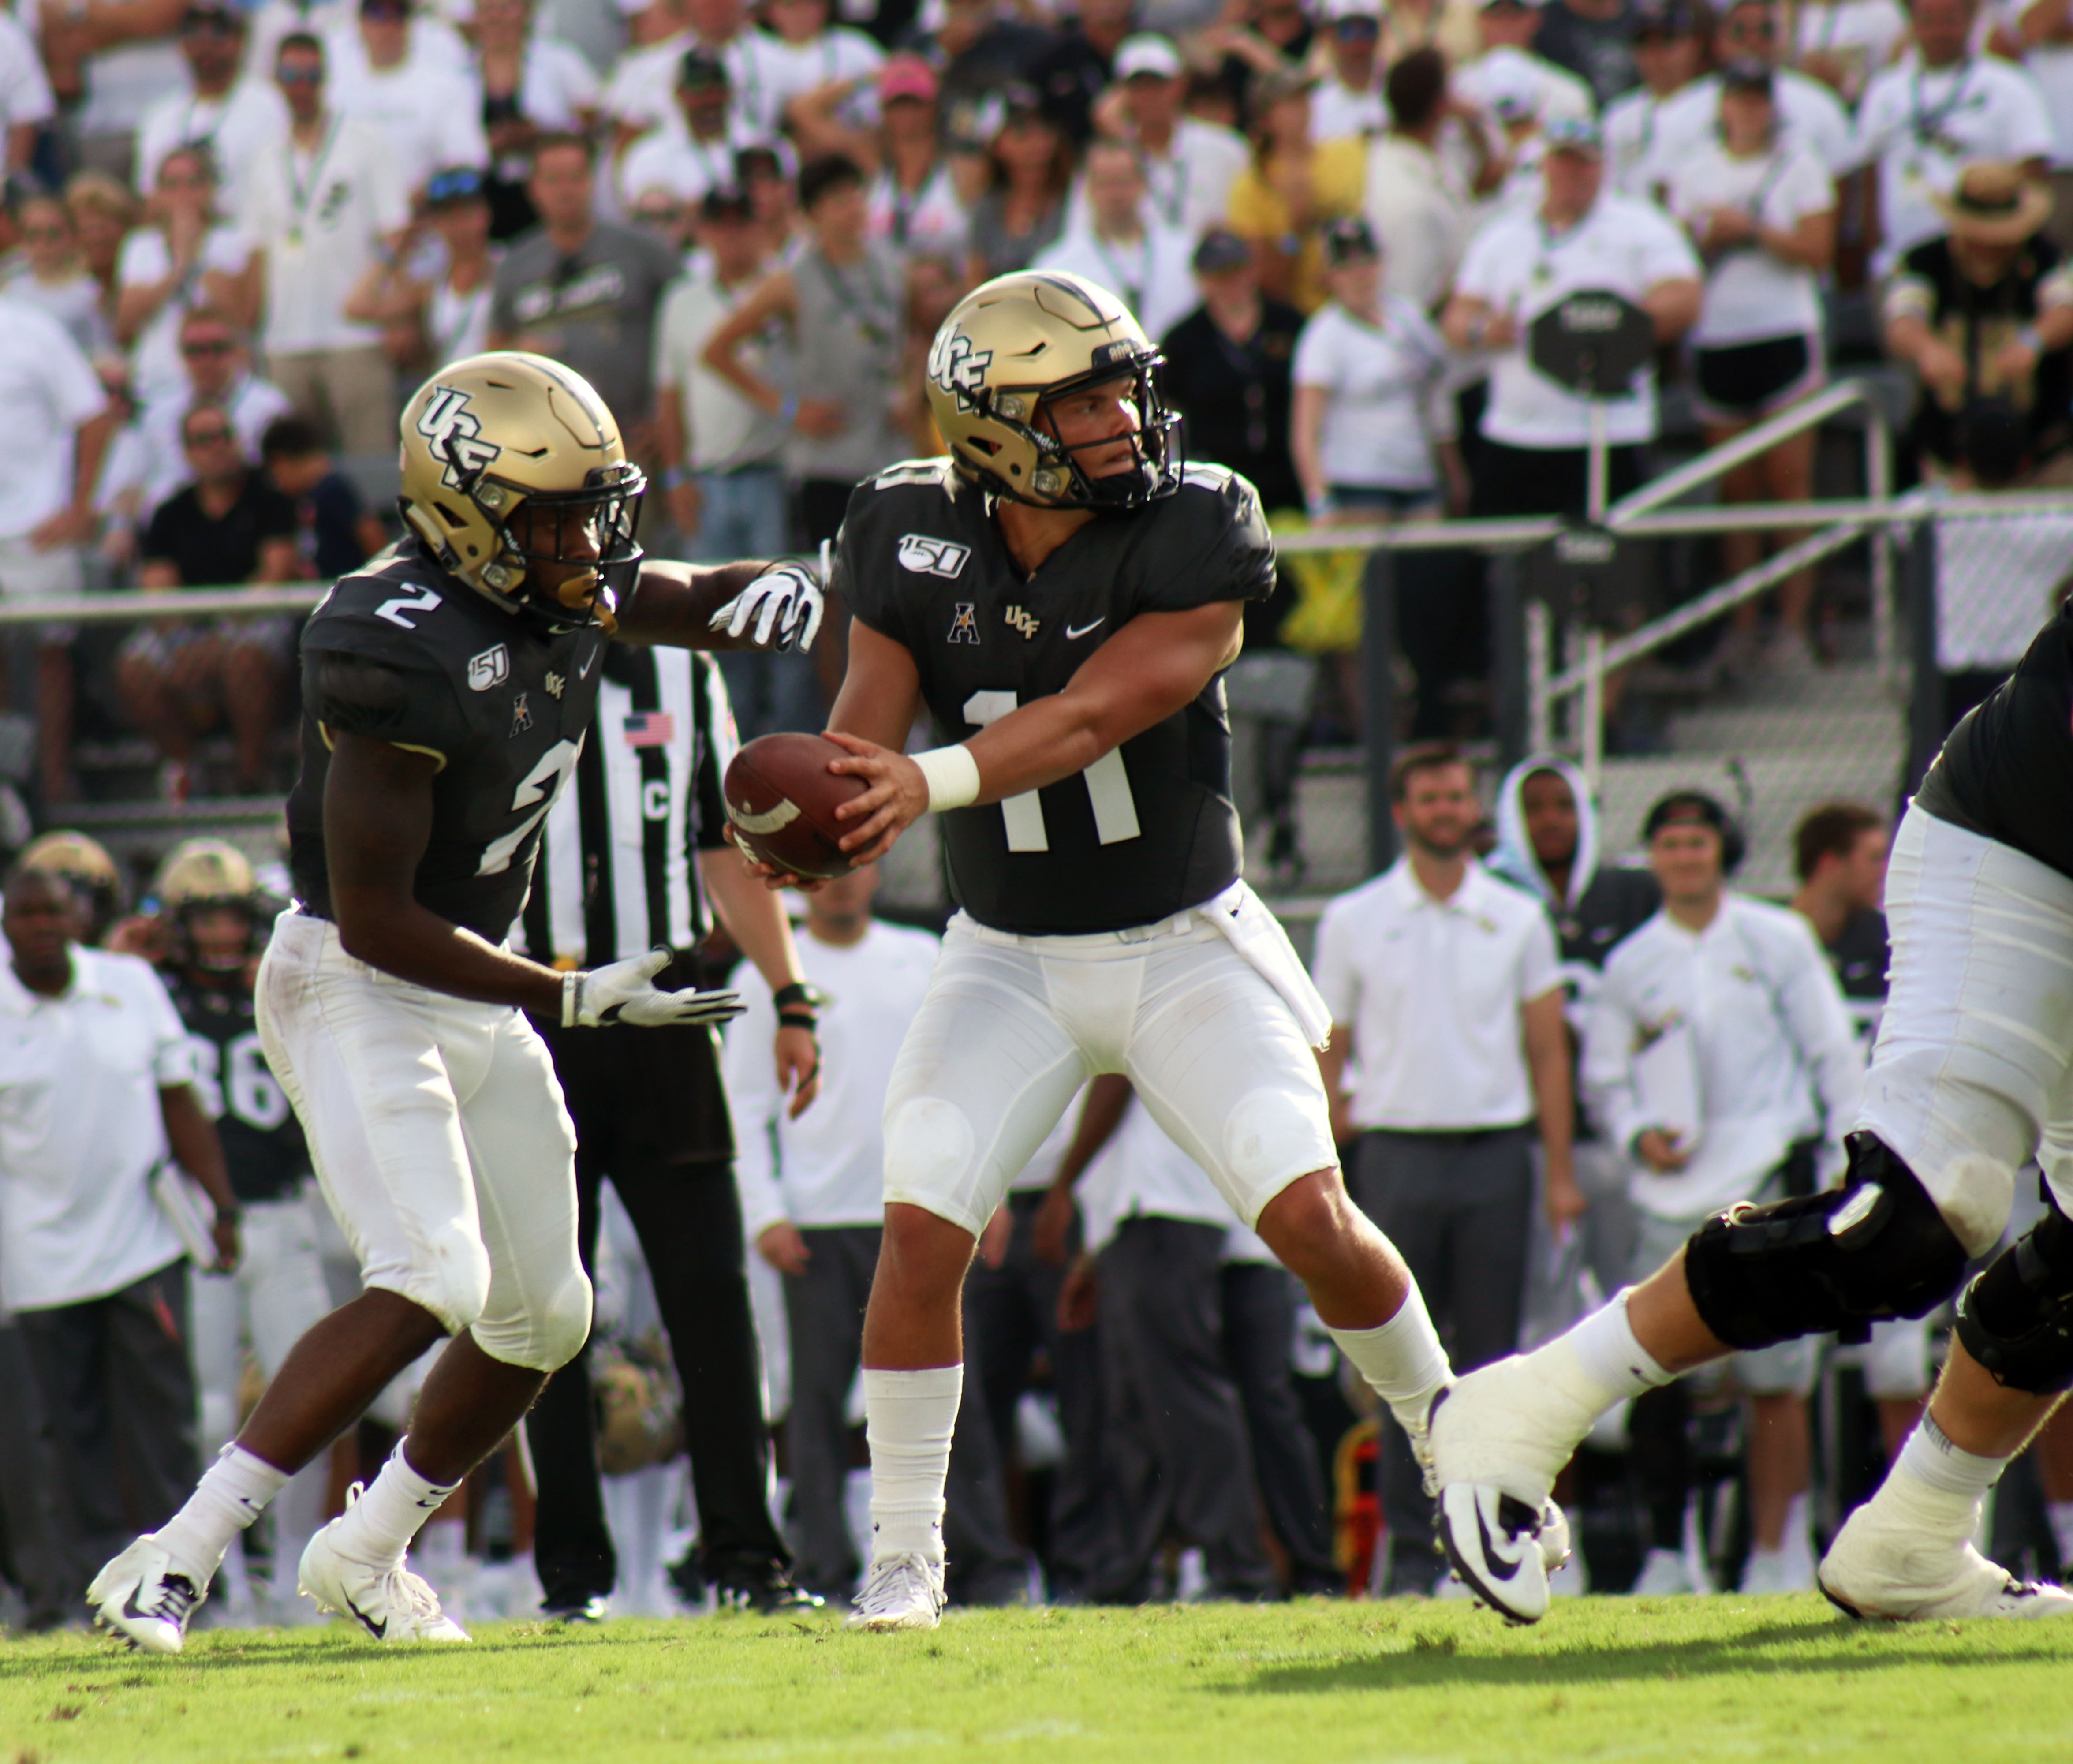 GALLERY: UCF Tops Stanford 45-27